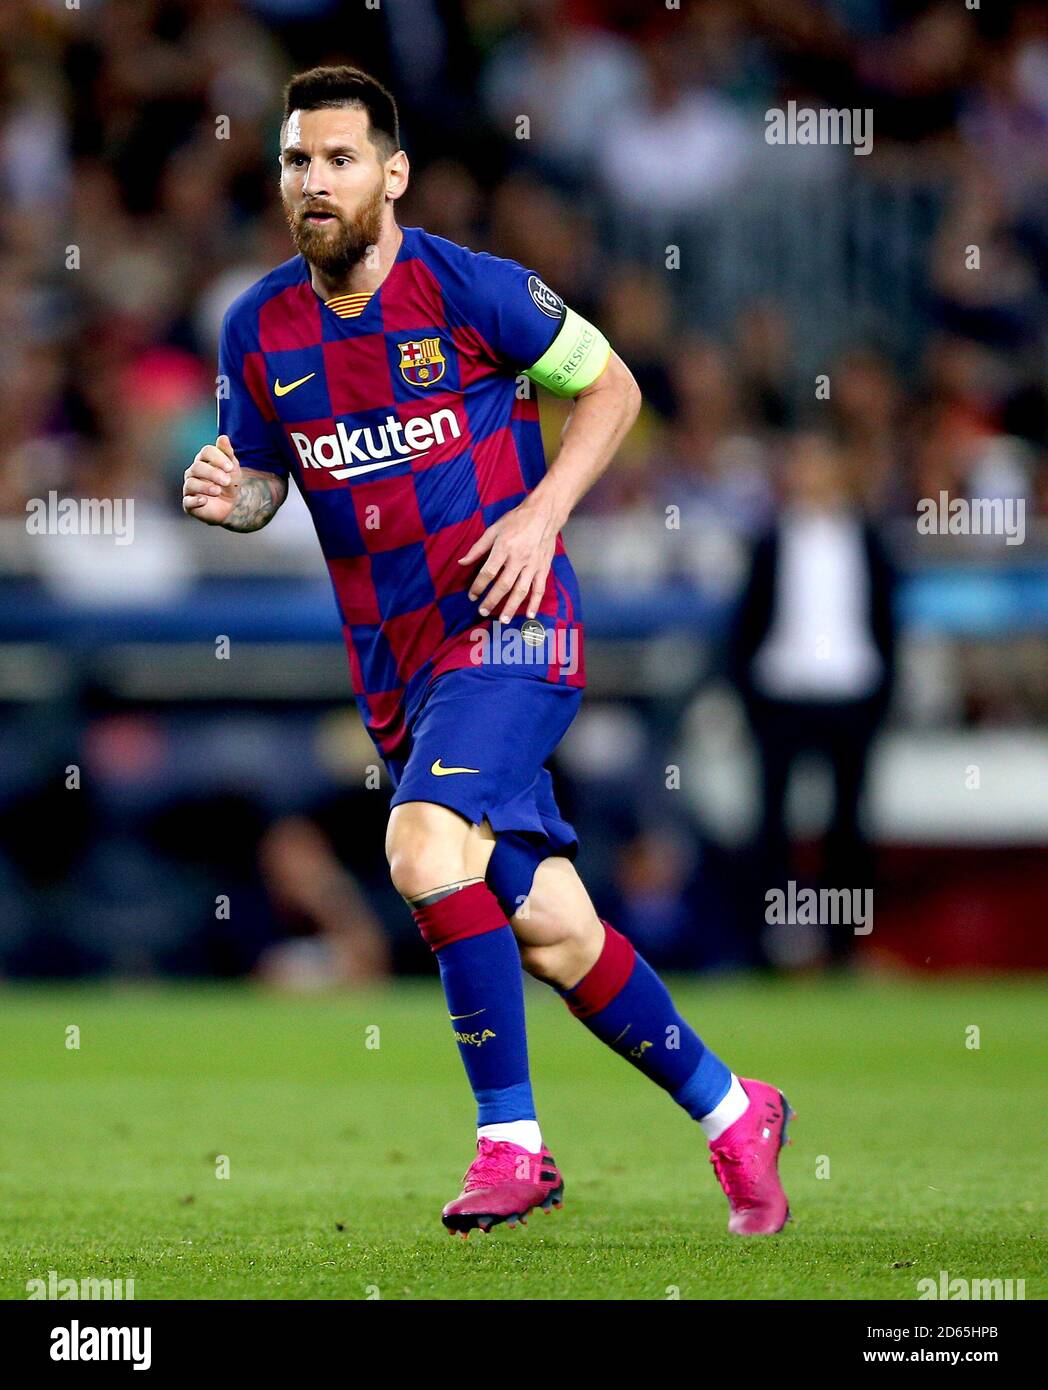 Messi In Motion